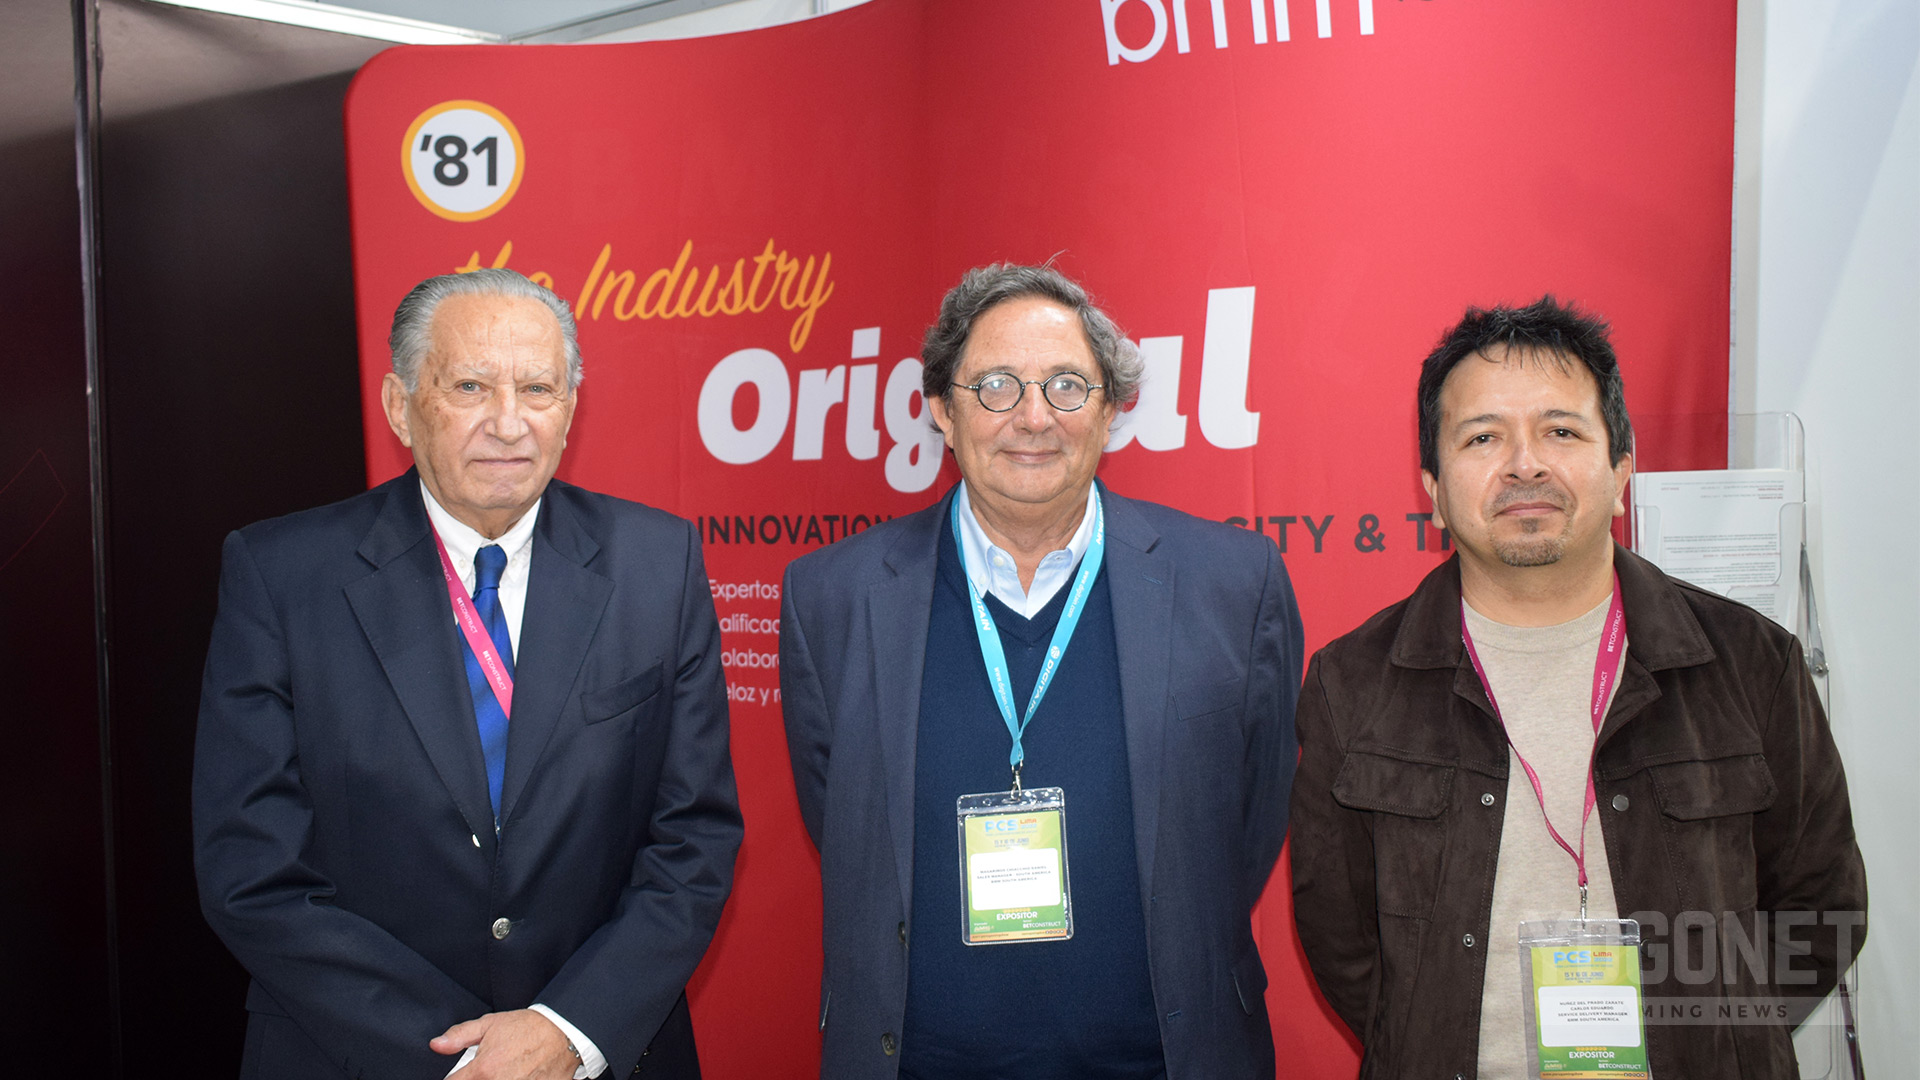 "Peru and the LatAm region play an extremely important role for BMM"